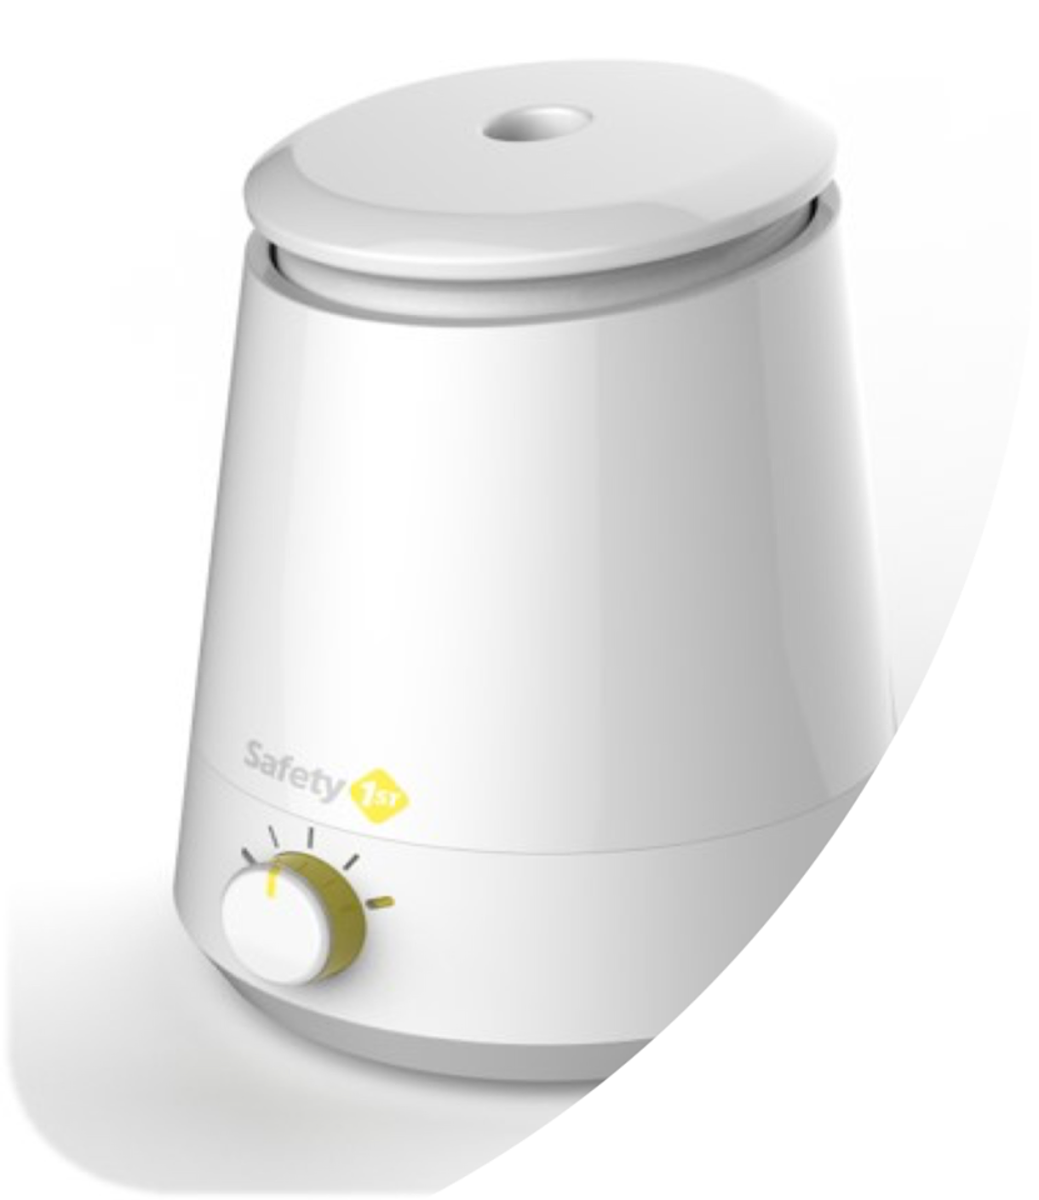 Best Infant/Parent Care Product: Safety 1st Stay Clean Humidifier